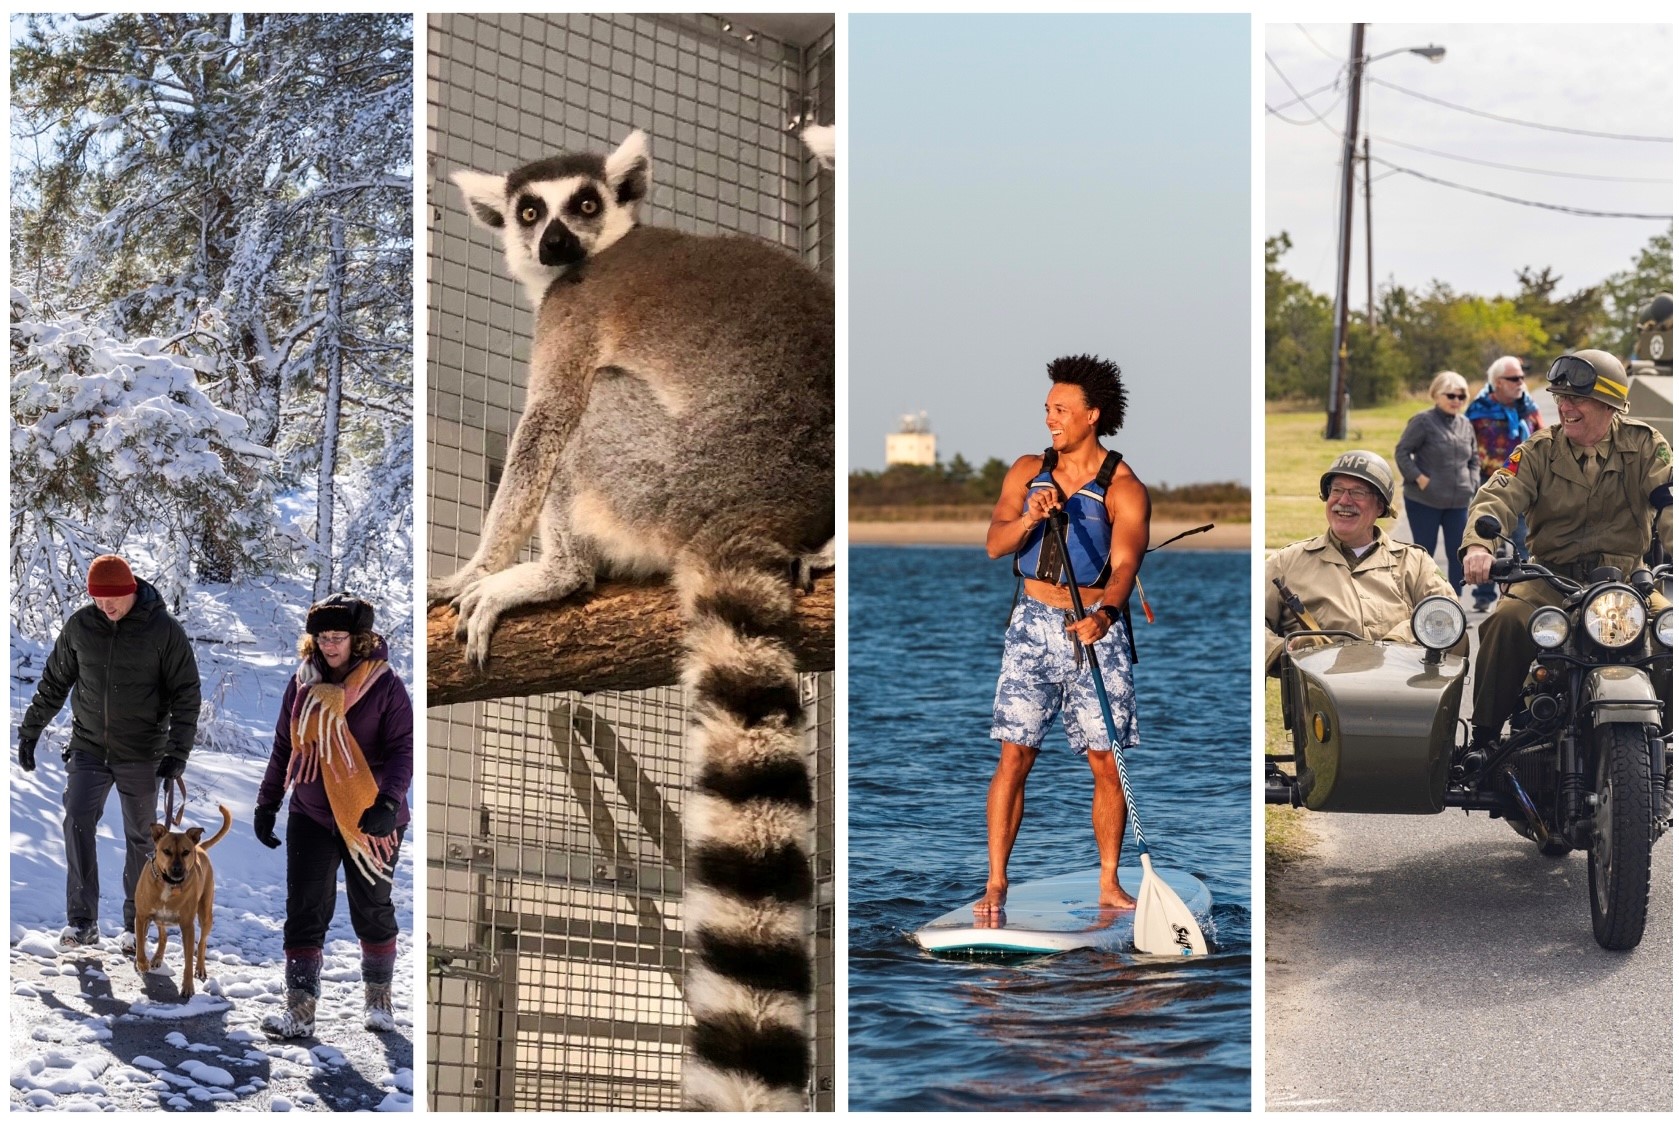 a couple walks a dog in snow-covered woods, a grey lemur perches on a branch in its new habitat, a man uses a stand-up paddle board and two WWII re-enactors ride on a motorcycle with a sidecar.